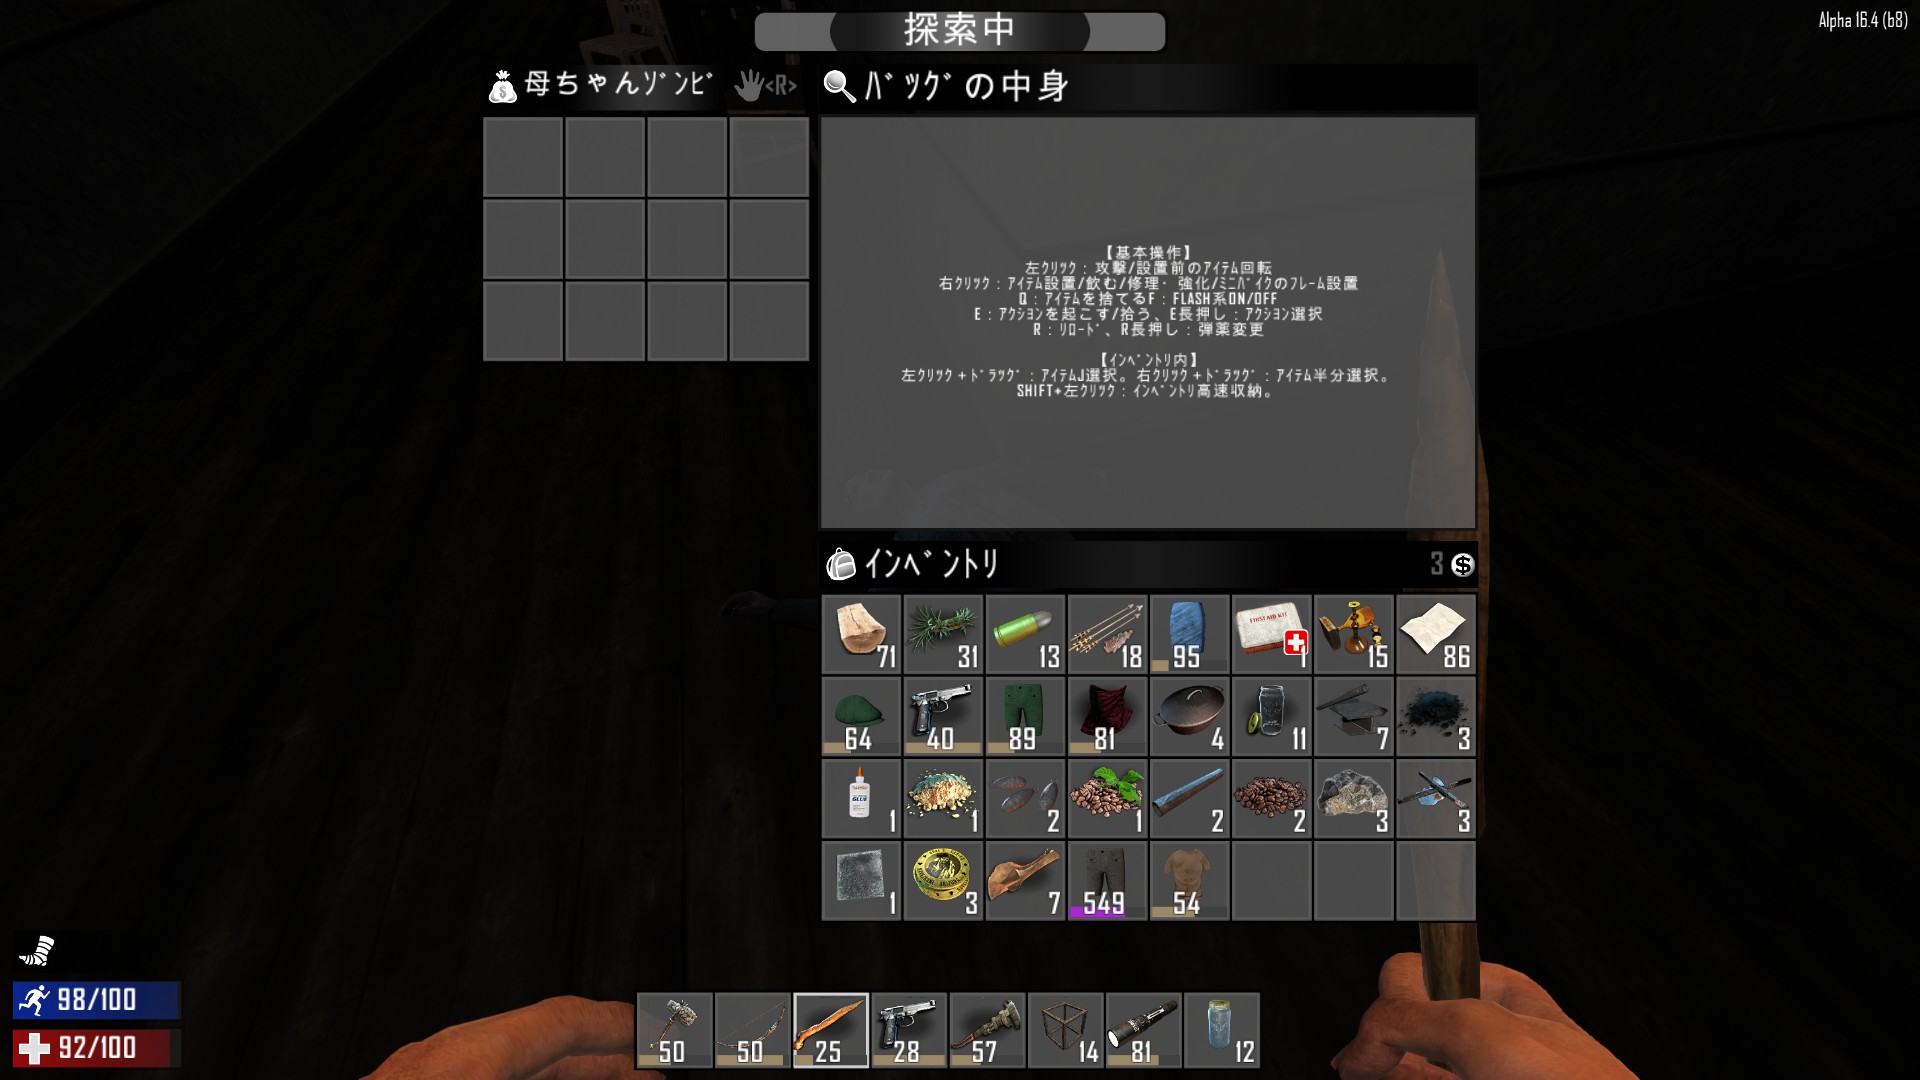 7 days to die god mode command